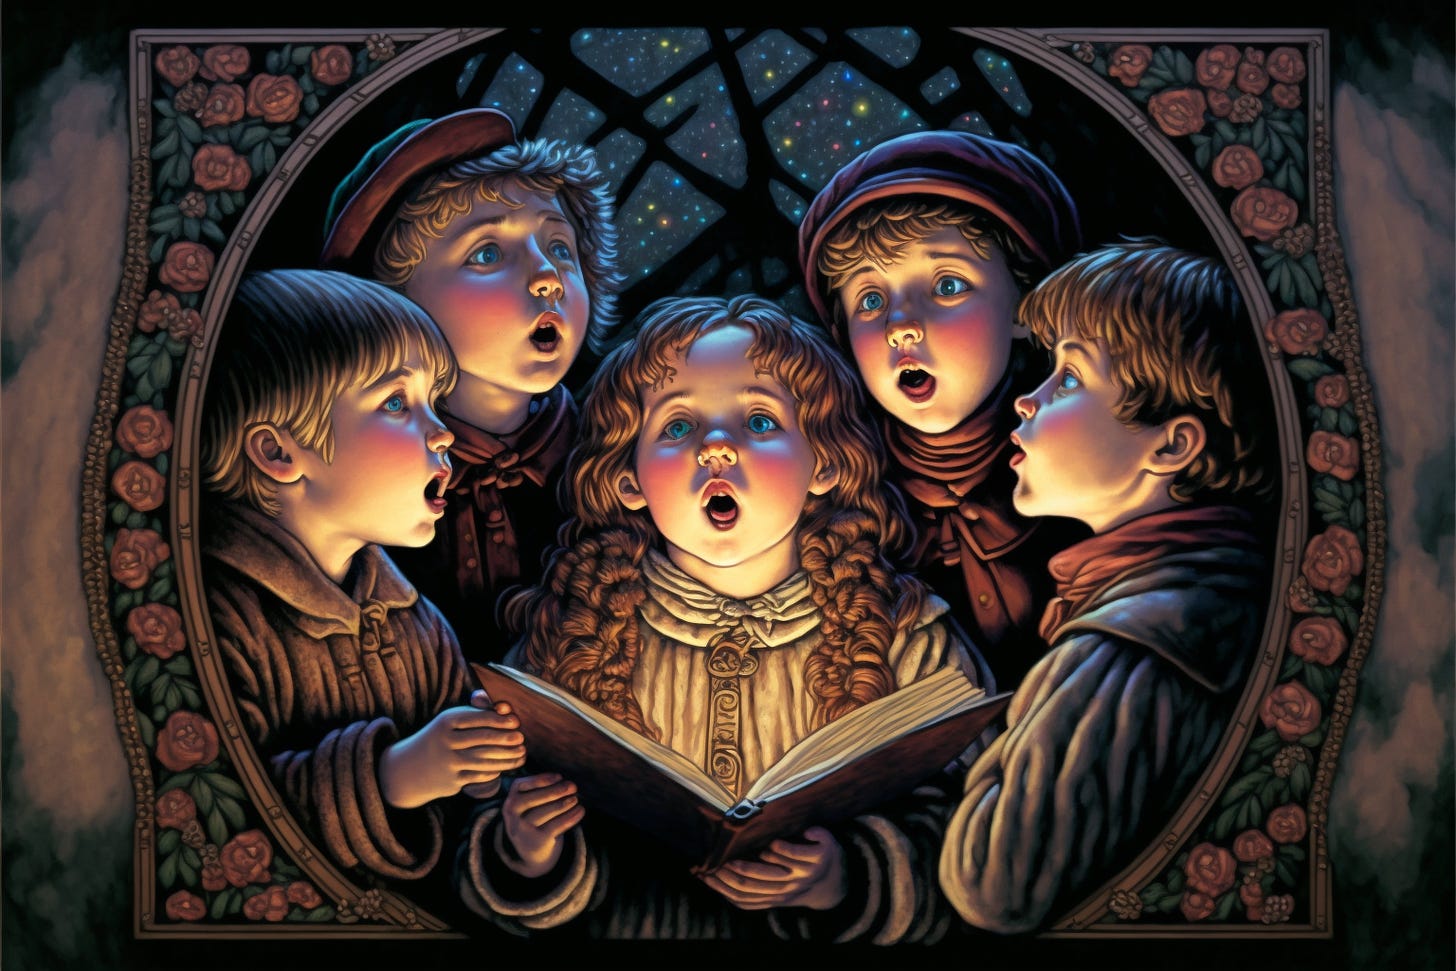 a sister and 4 brothers singing Christmas carols together